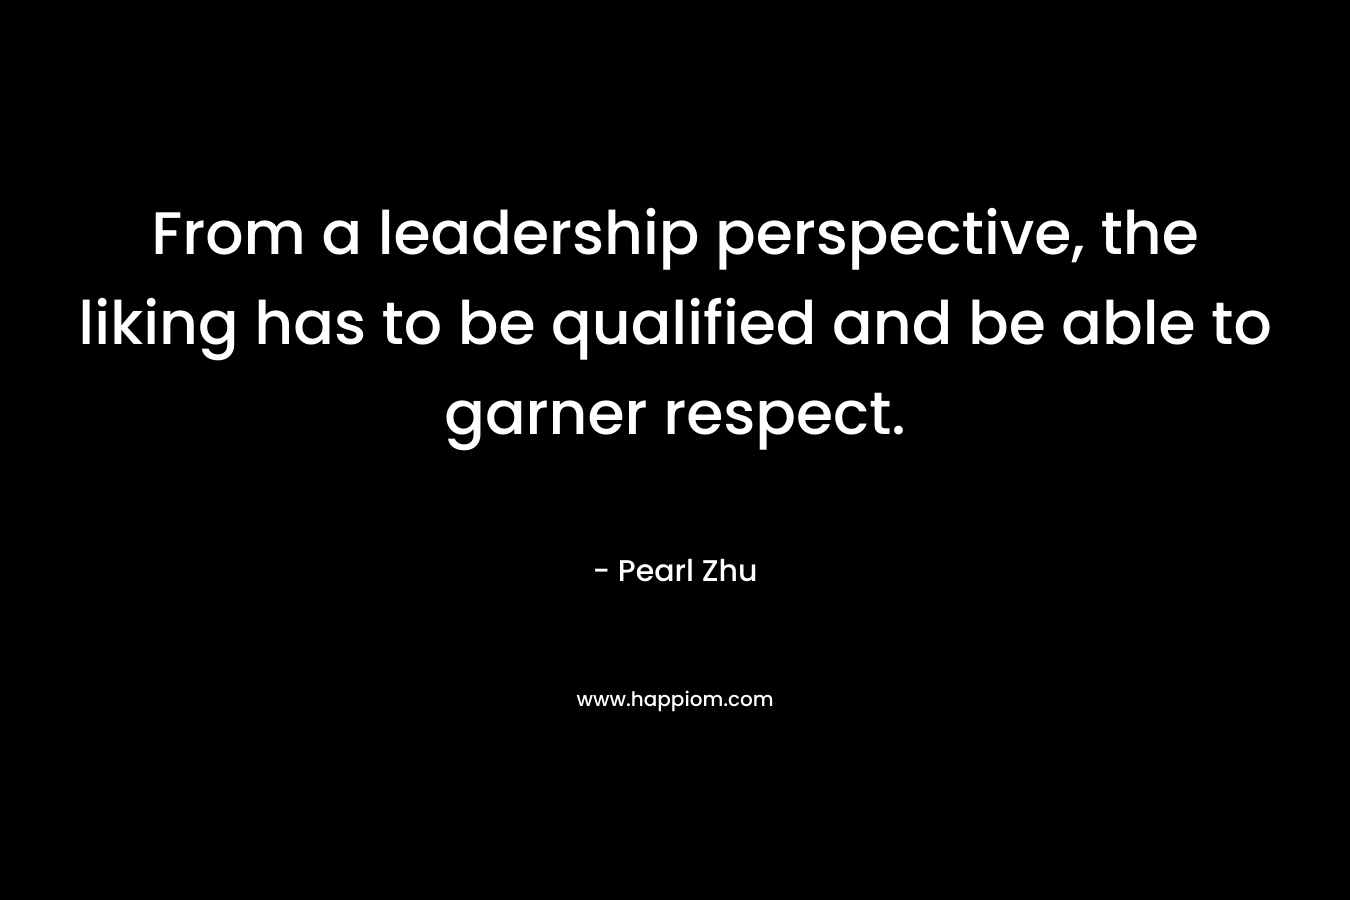 From a leadership perspective, the liking has to be qualified and be able to garner respect. – Pearl Zhu